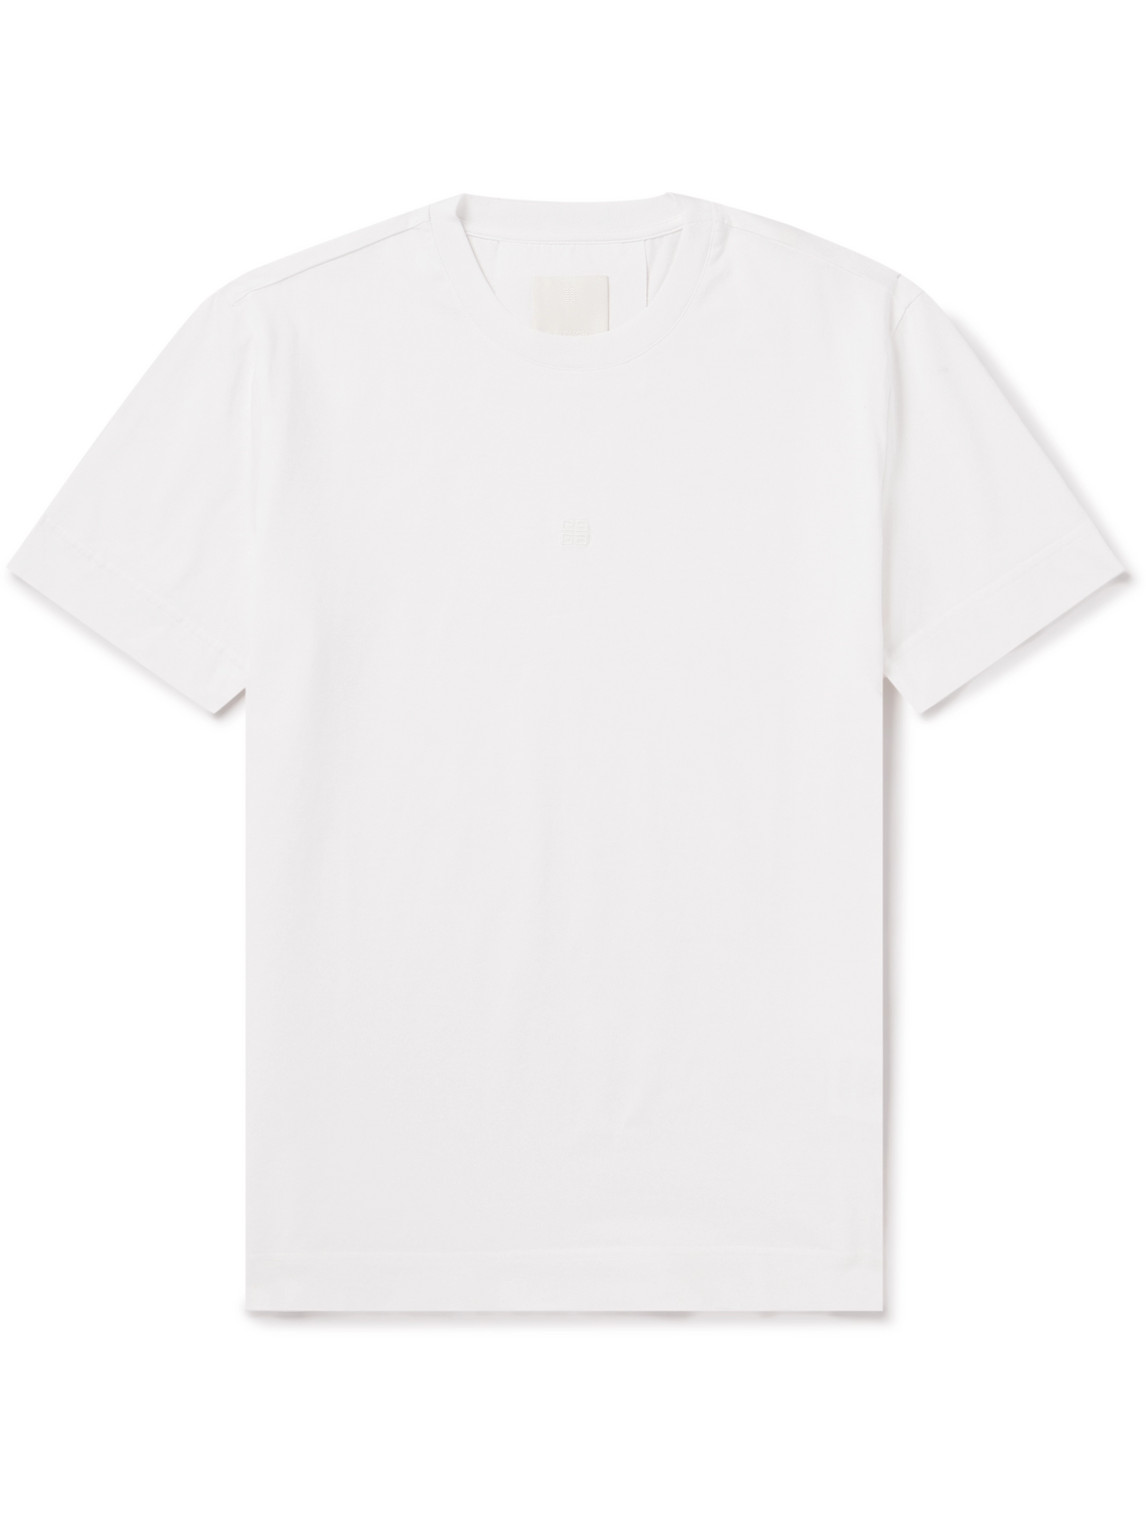 Givenchy - Logo-Embroidered Cotton-Jersey T-Shirt - Men - White - M von Givenchy